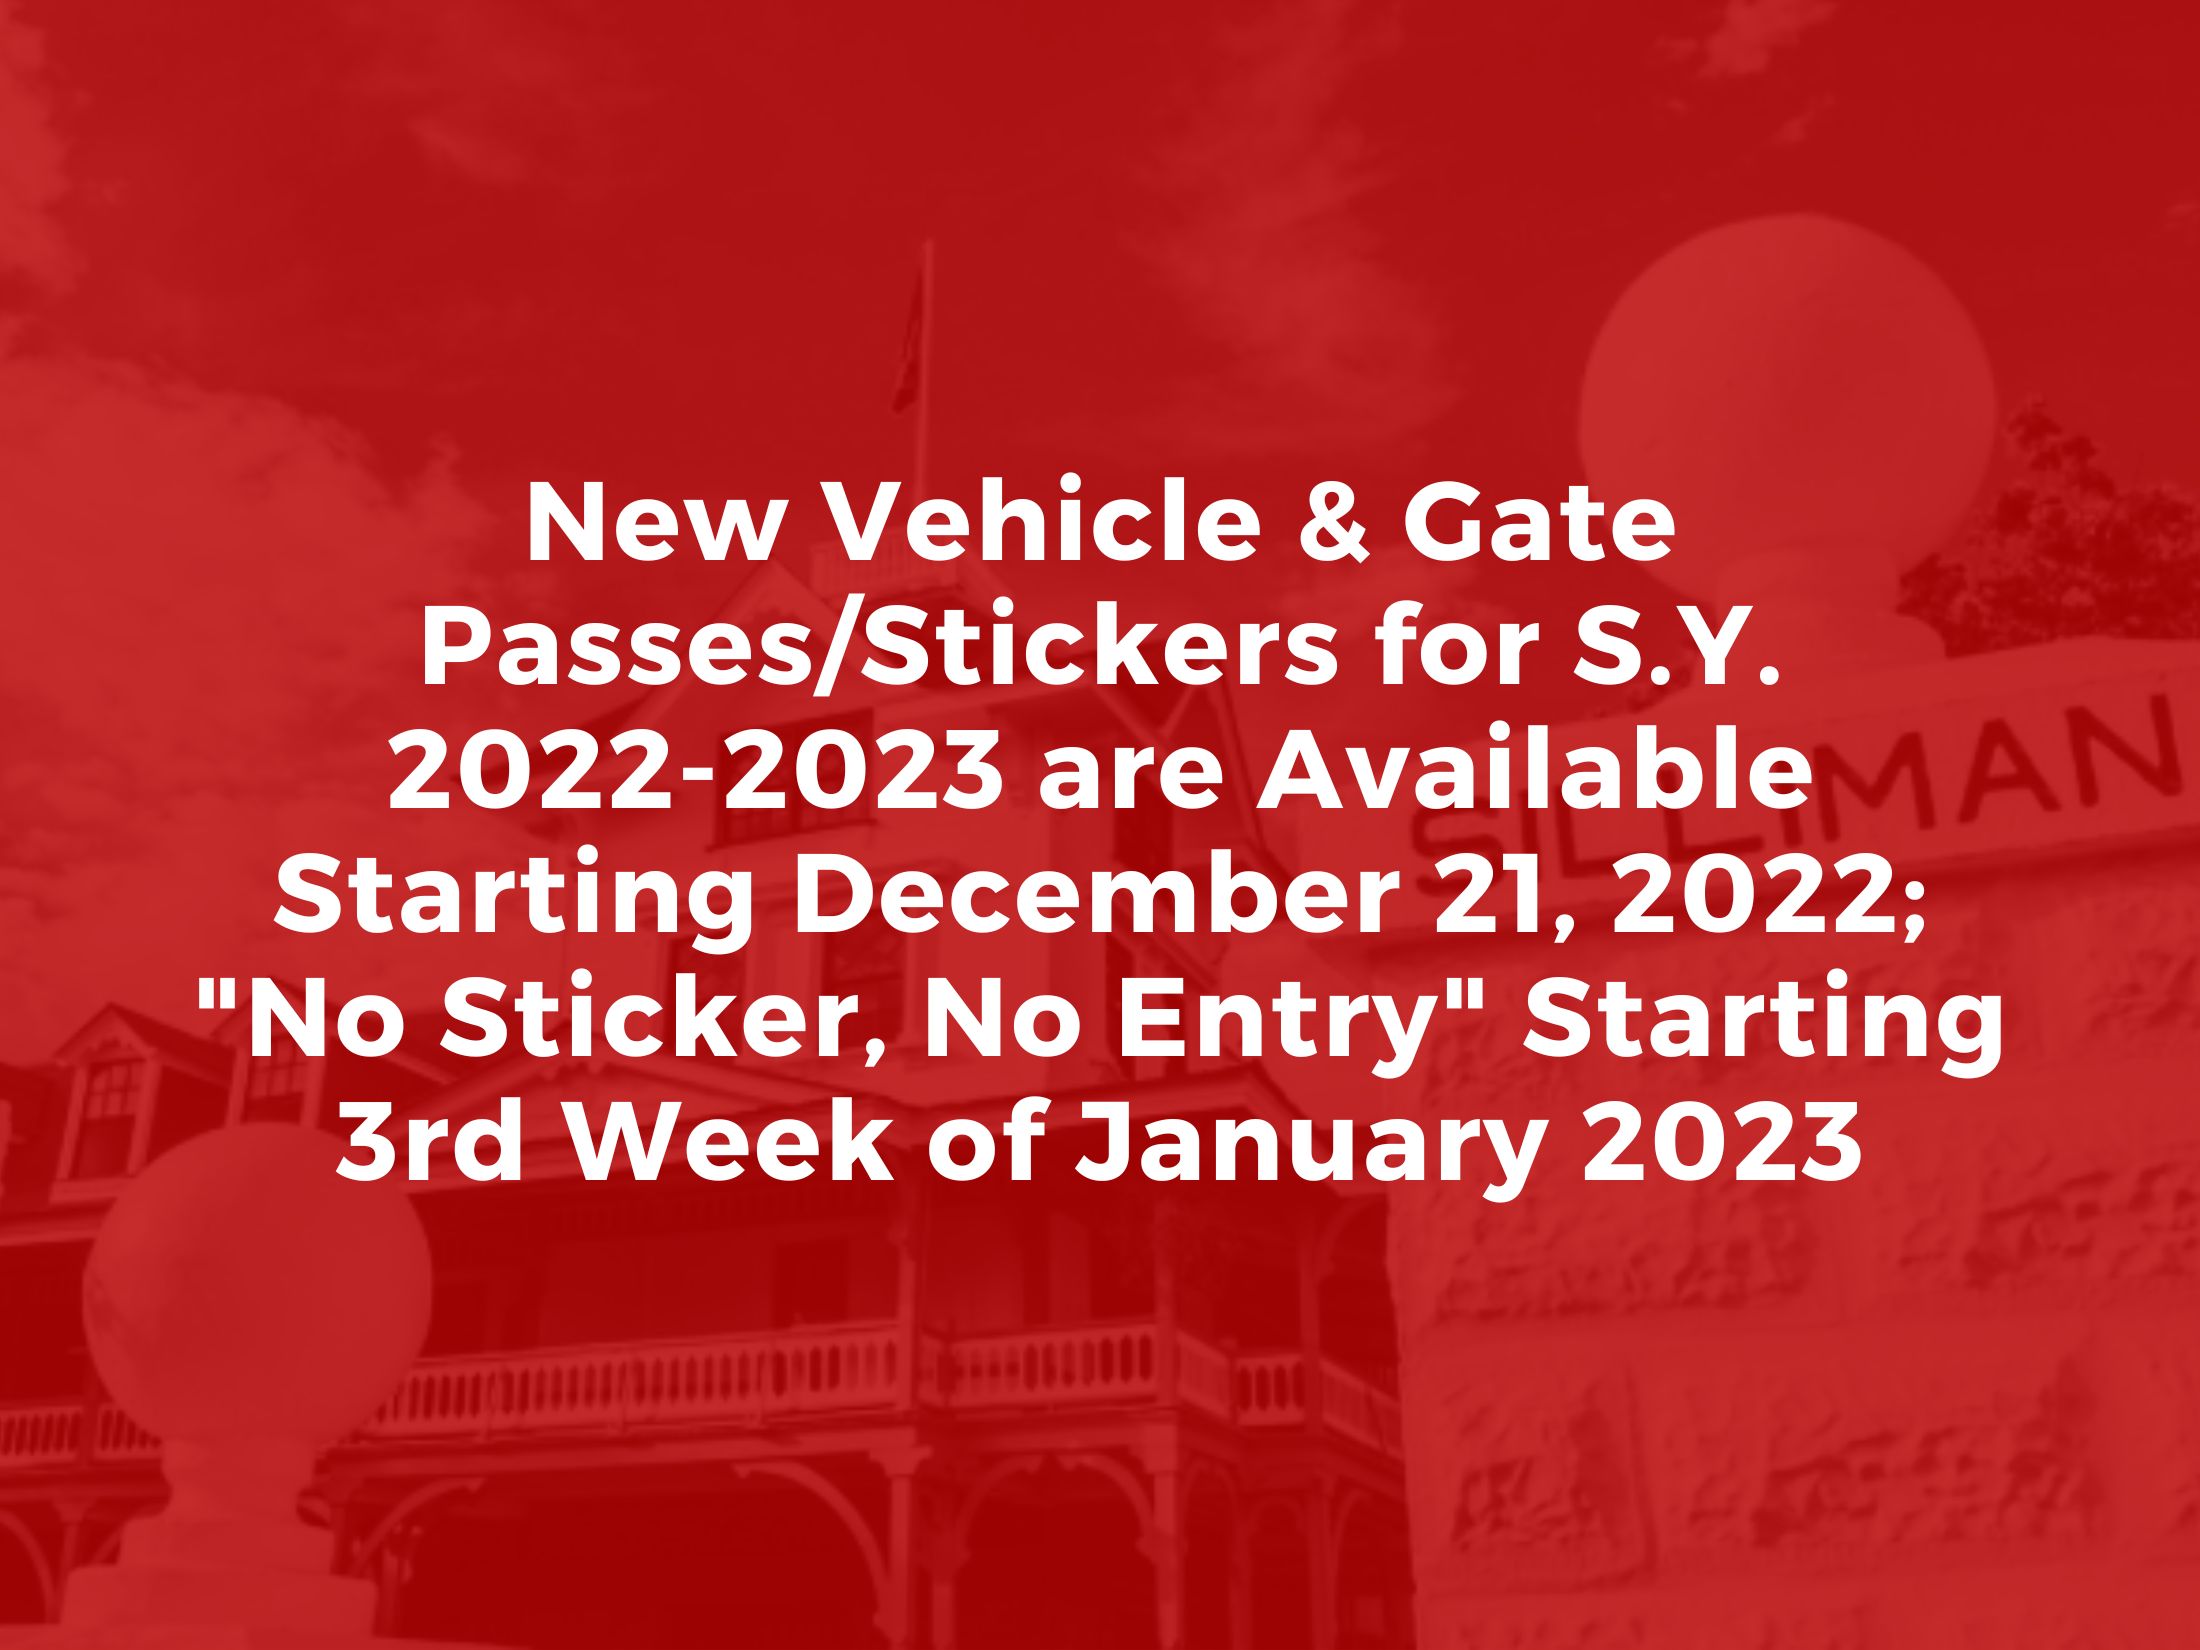 Announcement: New Vehicle & Gate Passes/Stickers for S.Y. 2022-2023 are Available Starting December 21, 2022; “No Sticker, No Entry” Starting 3rd Week of January 2023